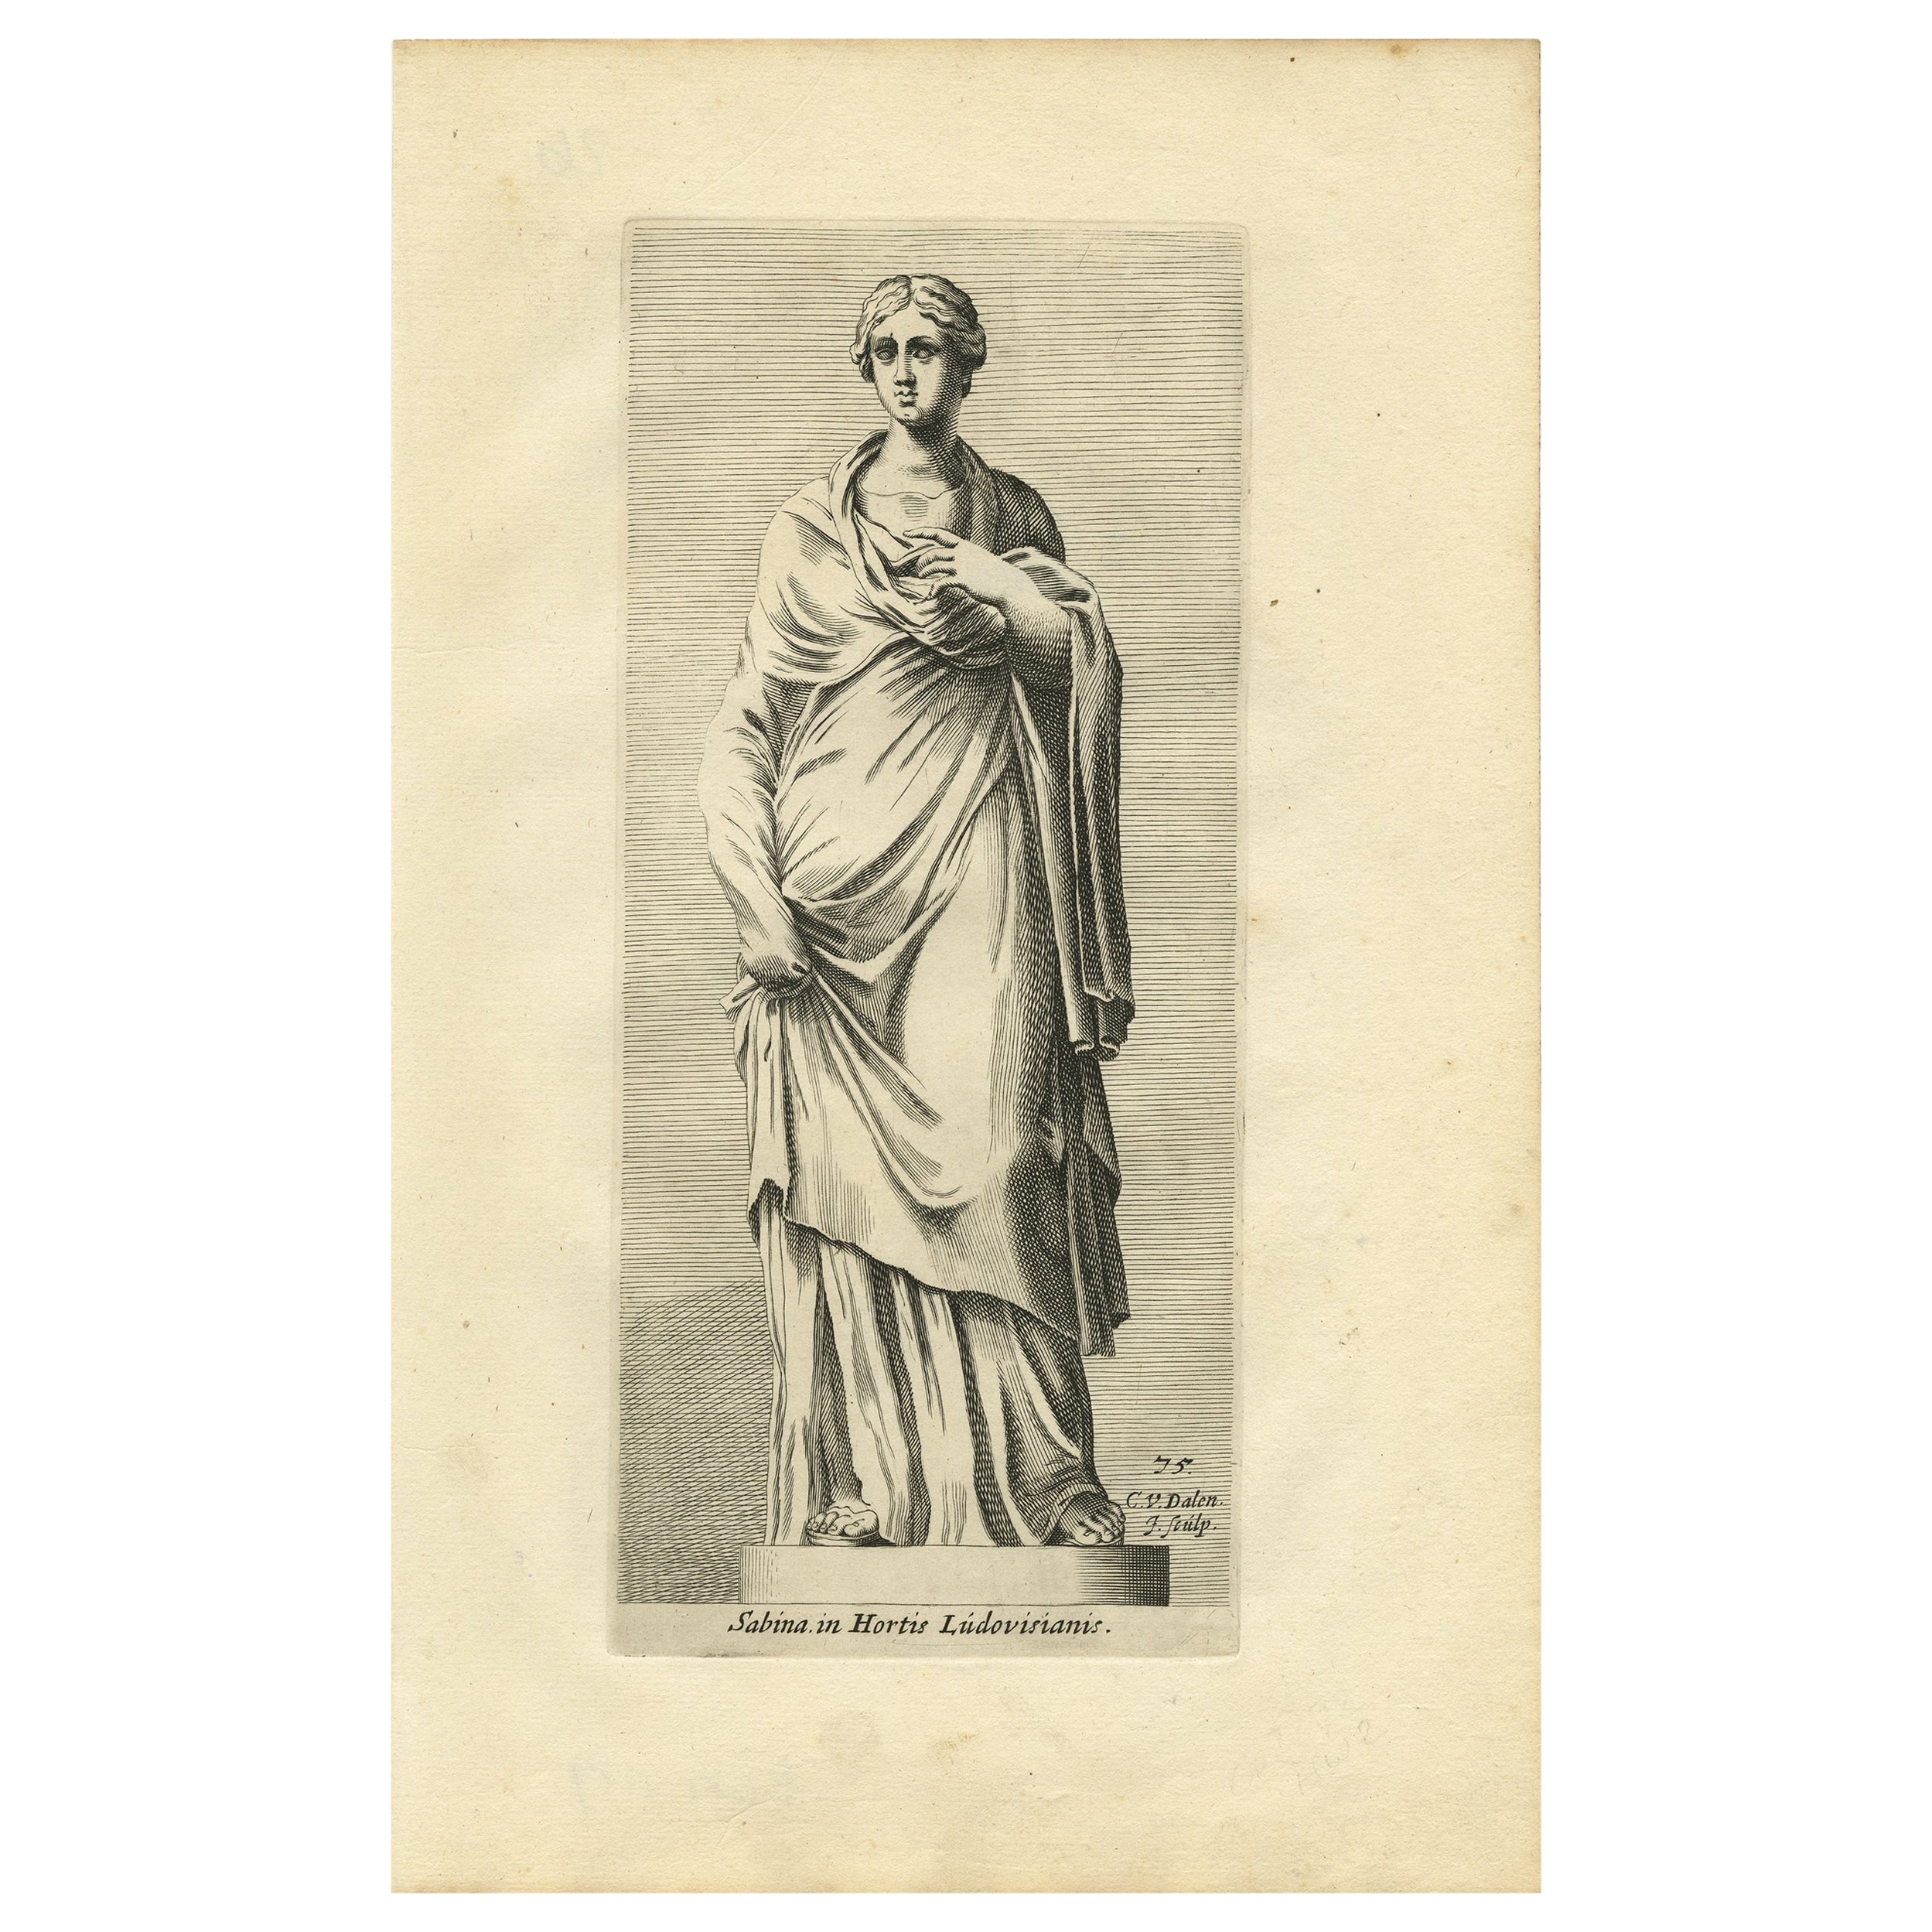 Original Antique Engraving of a Statue of a Sabine Woman in Rome, Italy